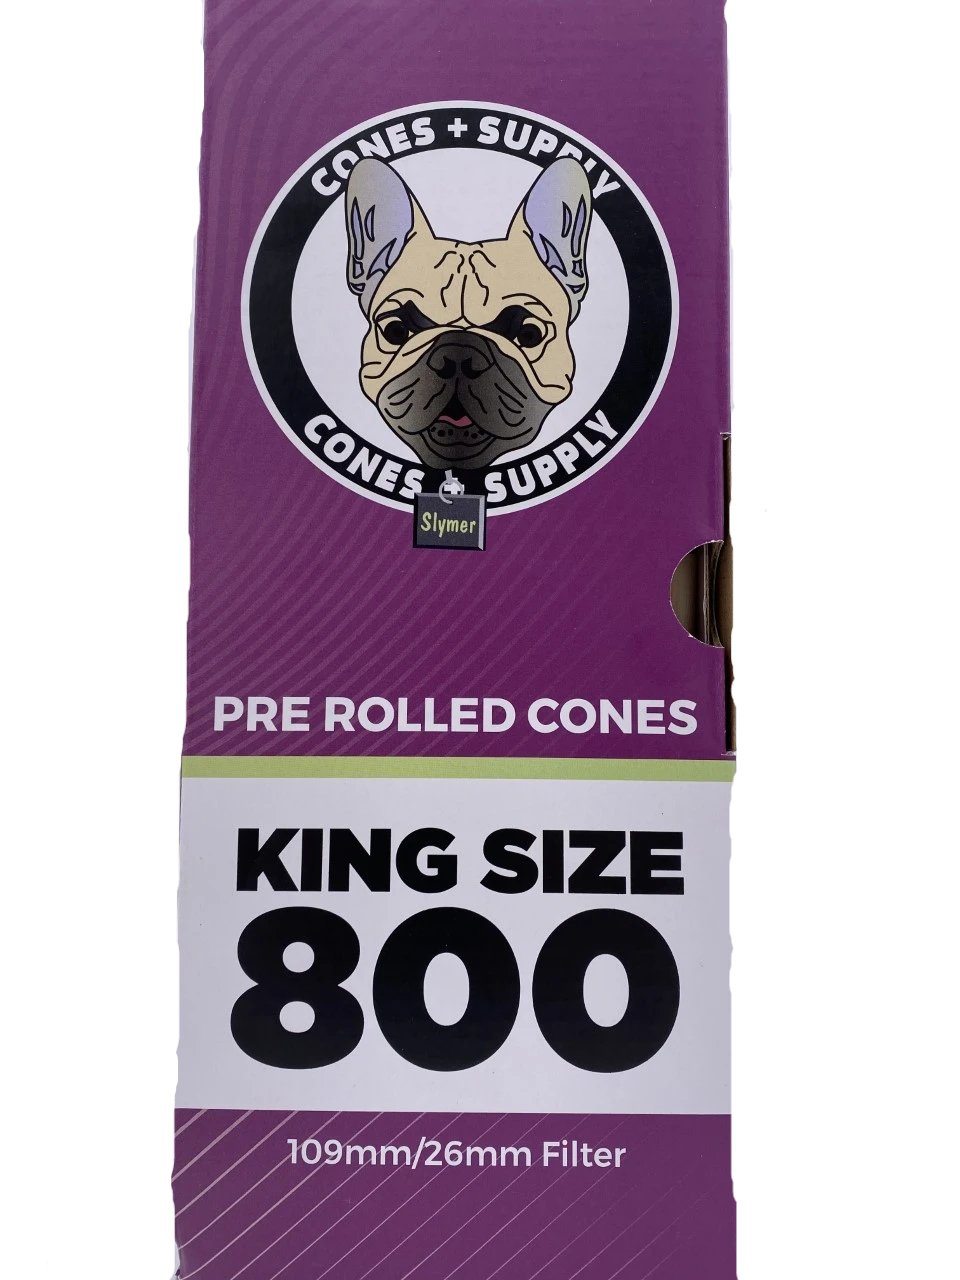 Cones + Supply Natural King Size Cones 109mm (800 Count) Flower Power Packages 